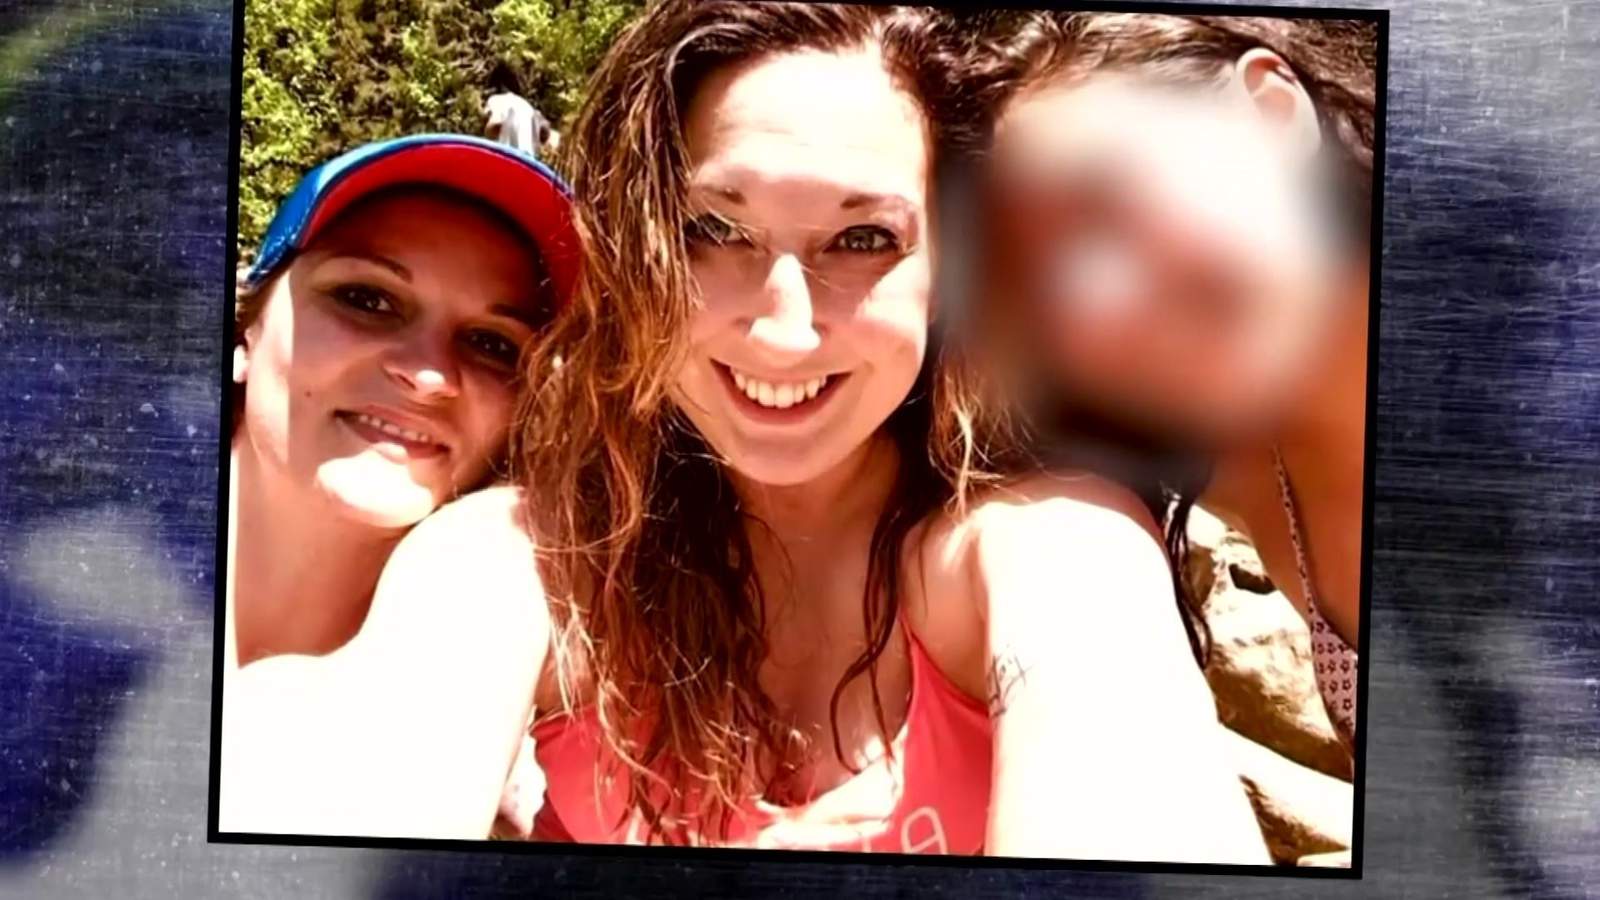 TIMELINE: Here are the key events in the Austin mom strangulation case